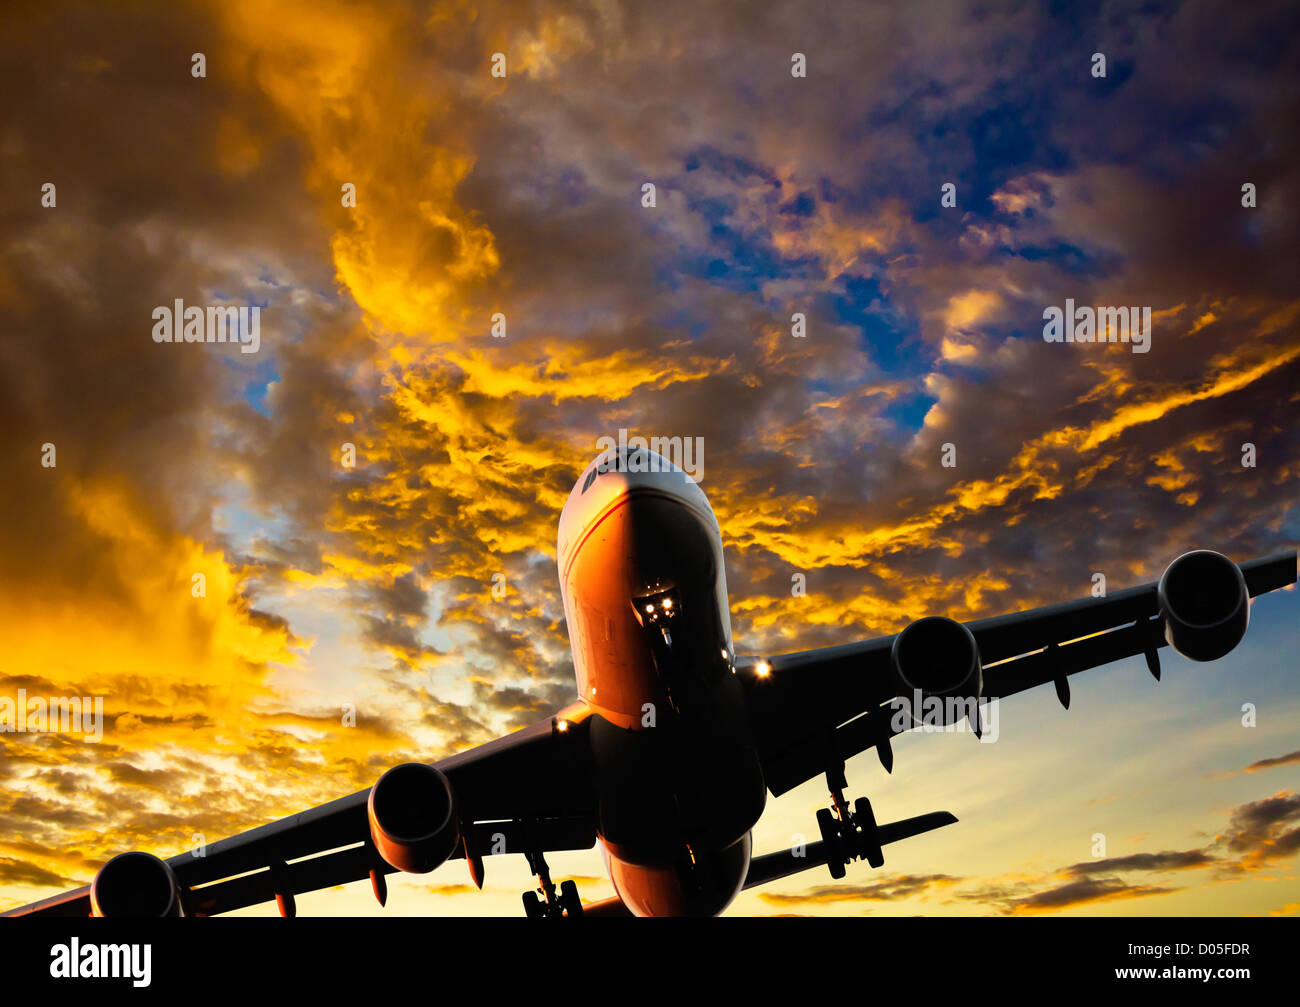 Jet PLane on approach to airport under stunning cloud formations.  Composite image Stock Photo